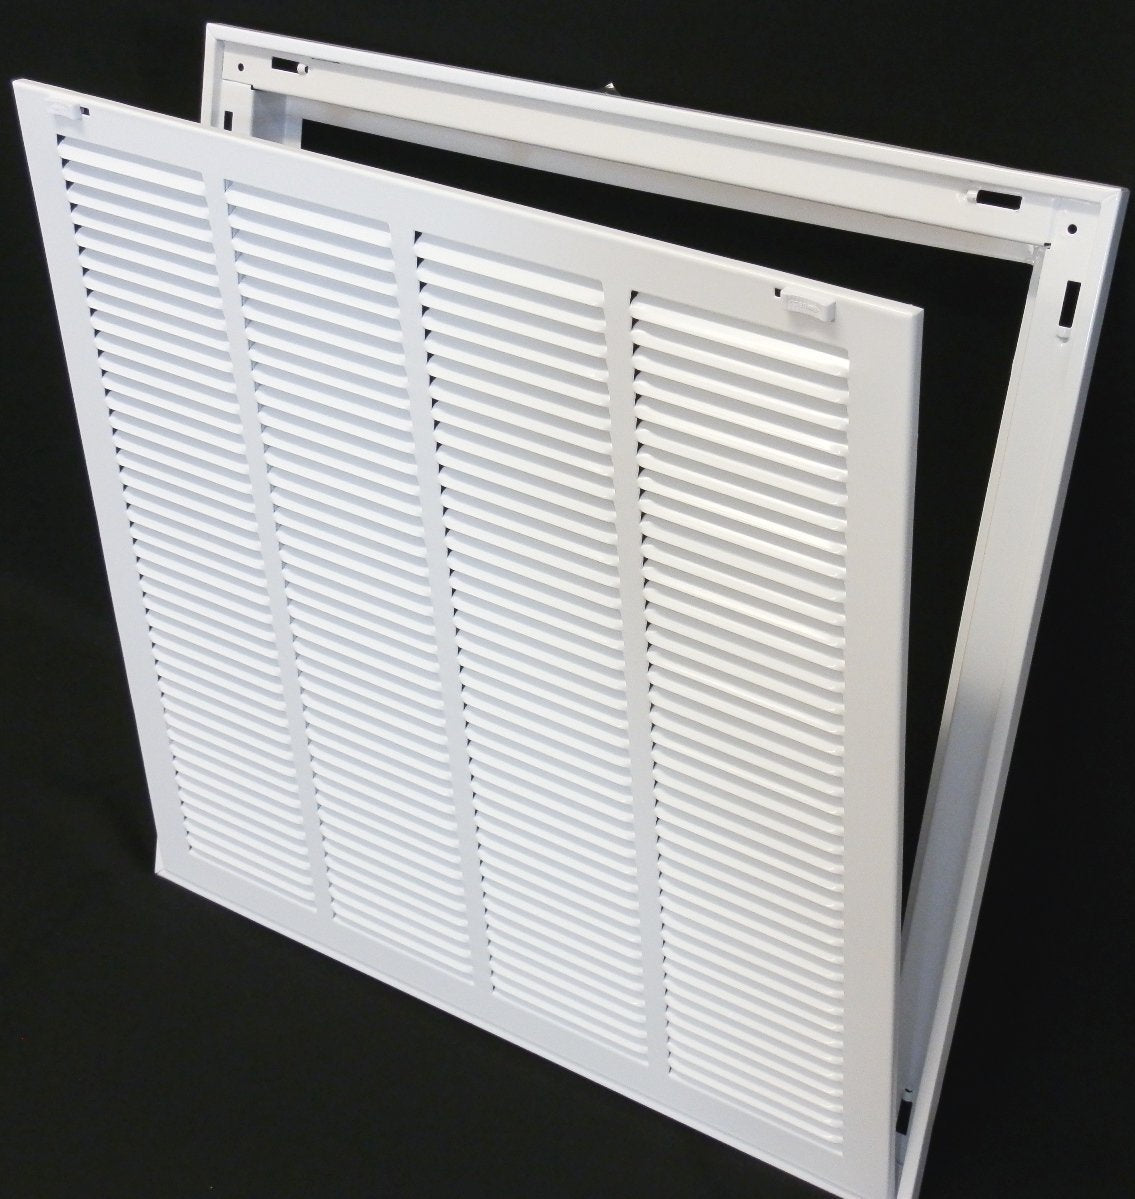 18&quot; X 26&quot; Steel Return Air Filter Grille for 1&quot; Filter - Removable Frame - [Outer Dimensions: 20 5/8&quot; X 28 5/8&quot;]